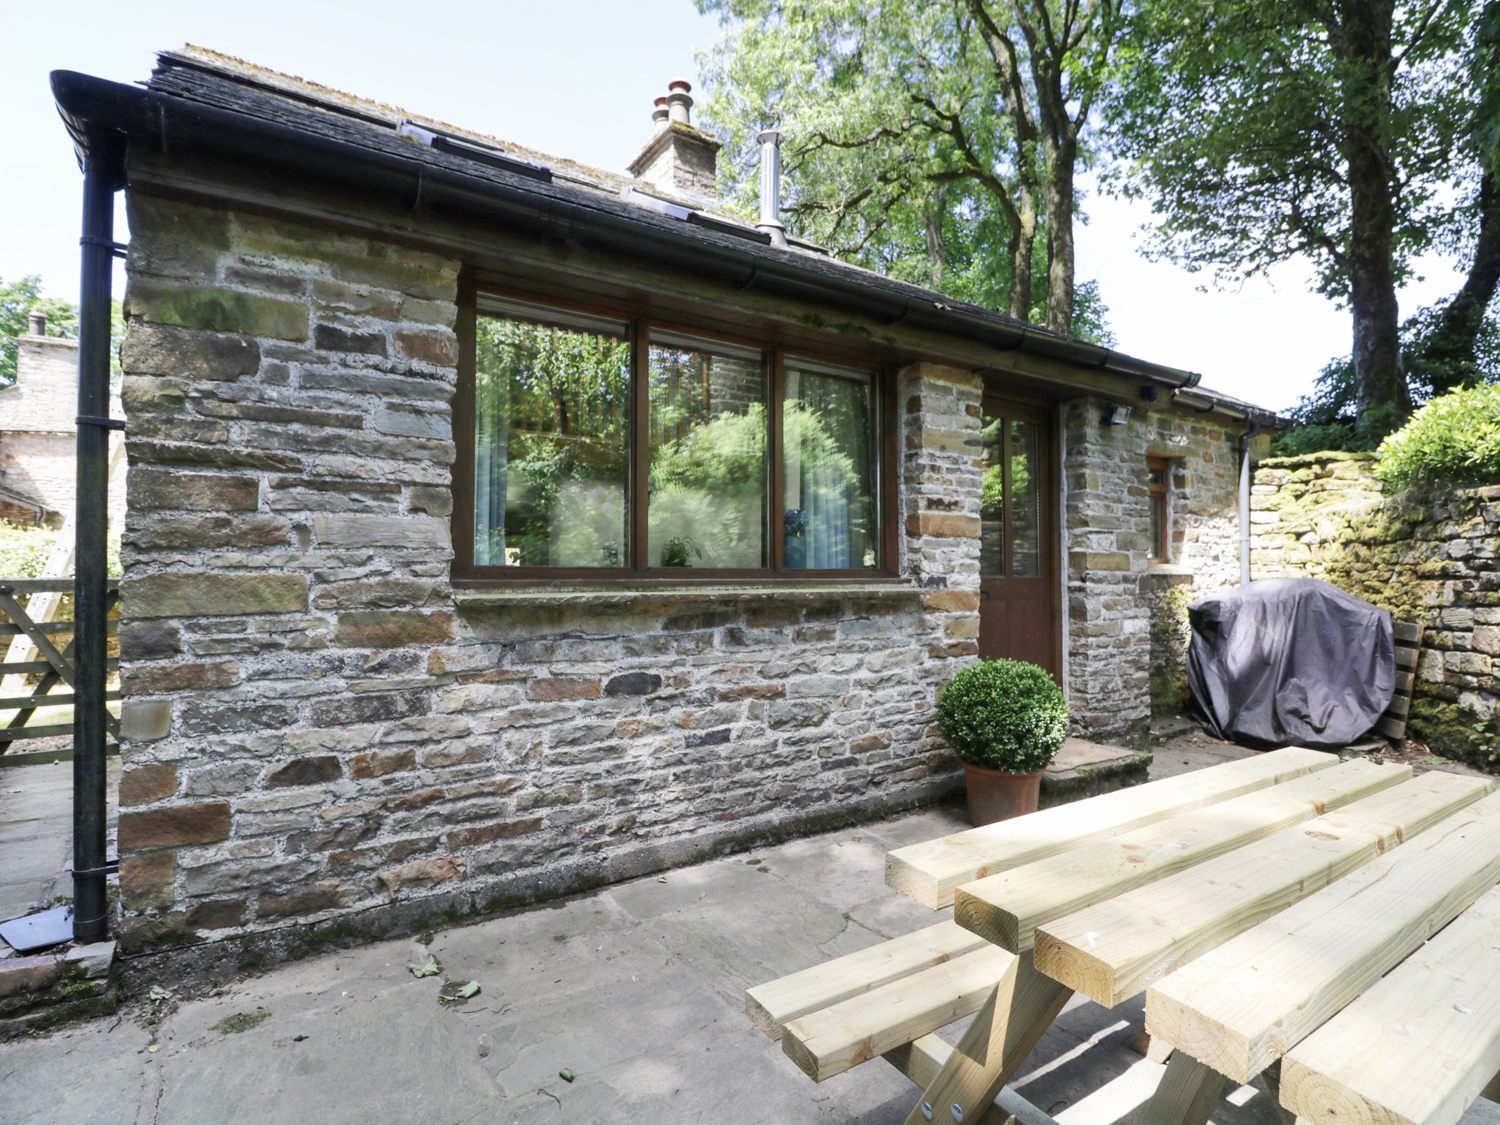 Bothy, The Lake District and Cumbria